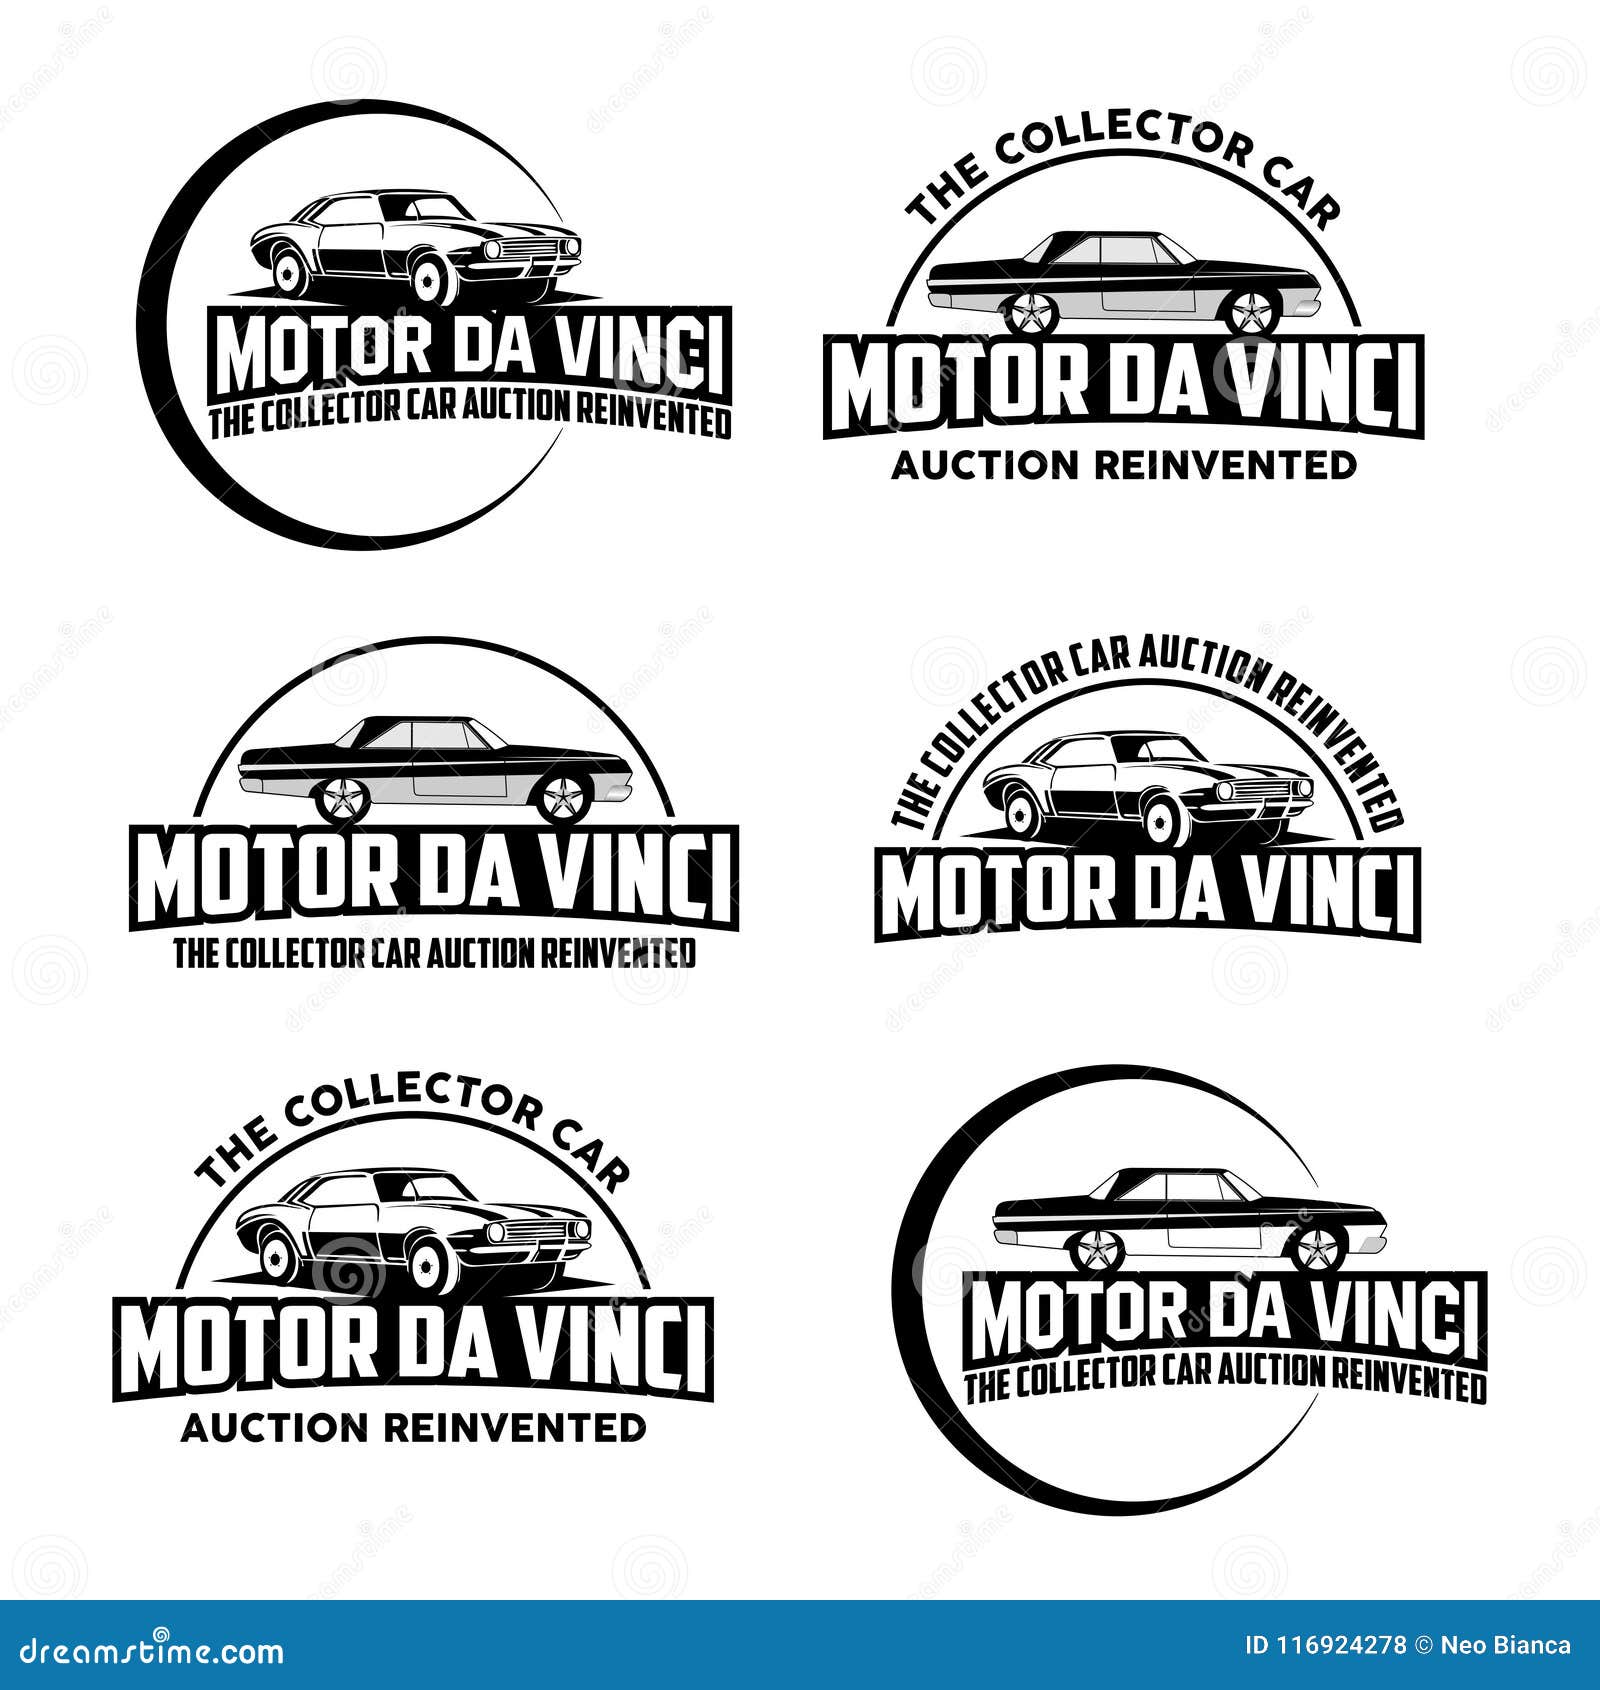 The Collector Car Logo Vector Stock Vector Illustration of corporate